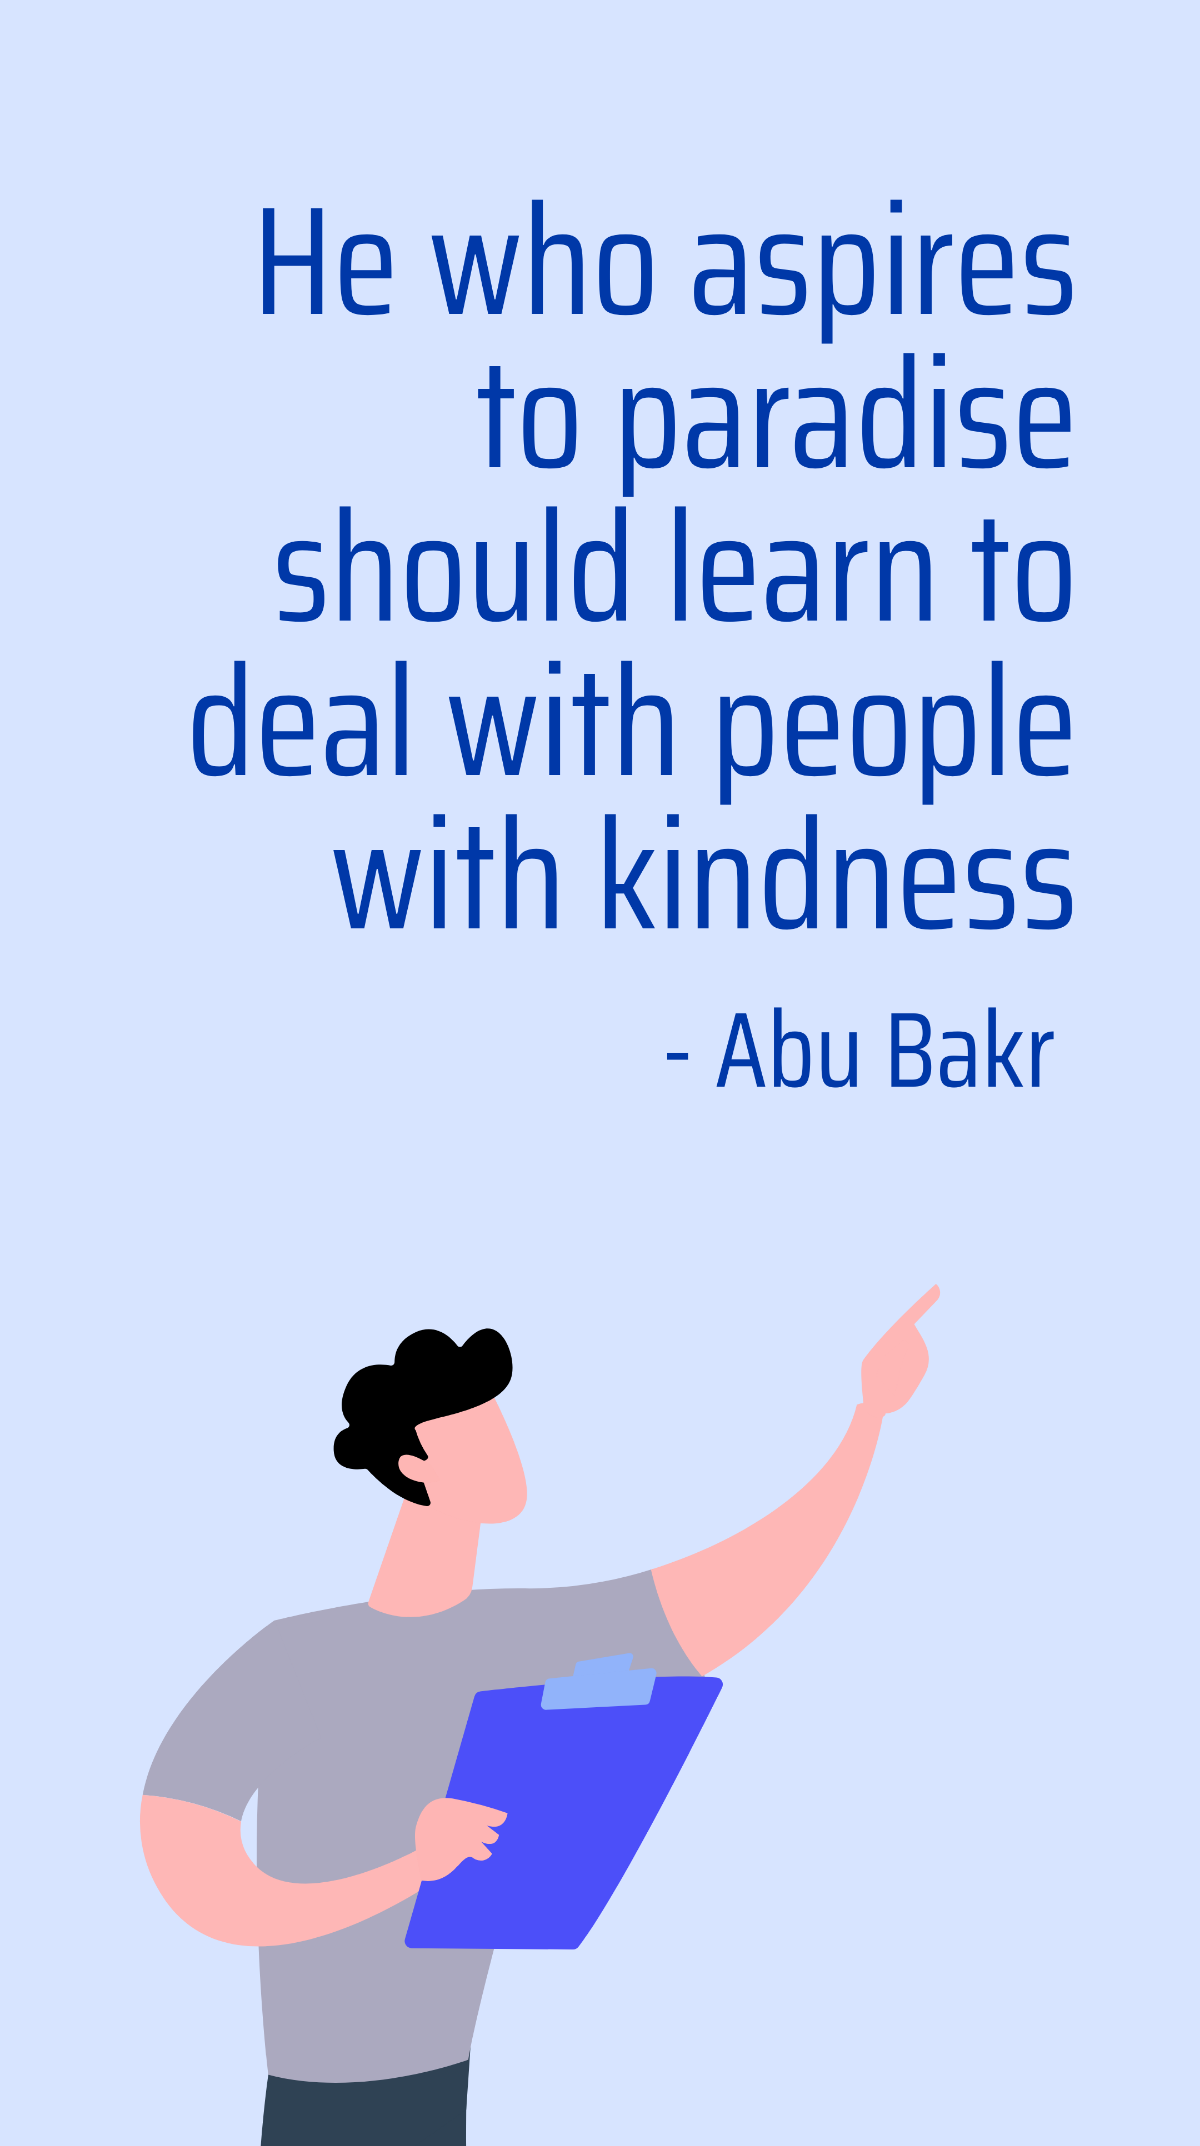 Abu Bakr - He who aspires to paradise should learn to deal with people with kindness Template